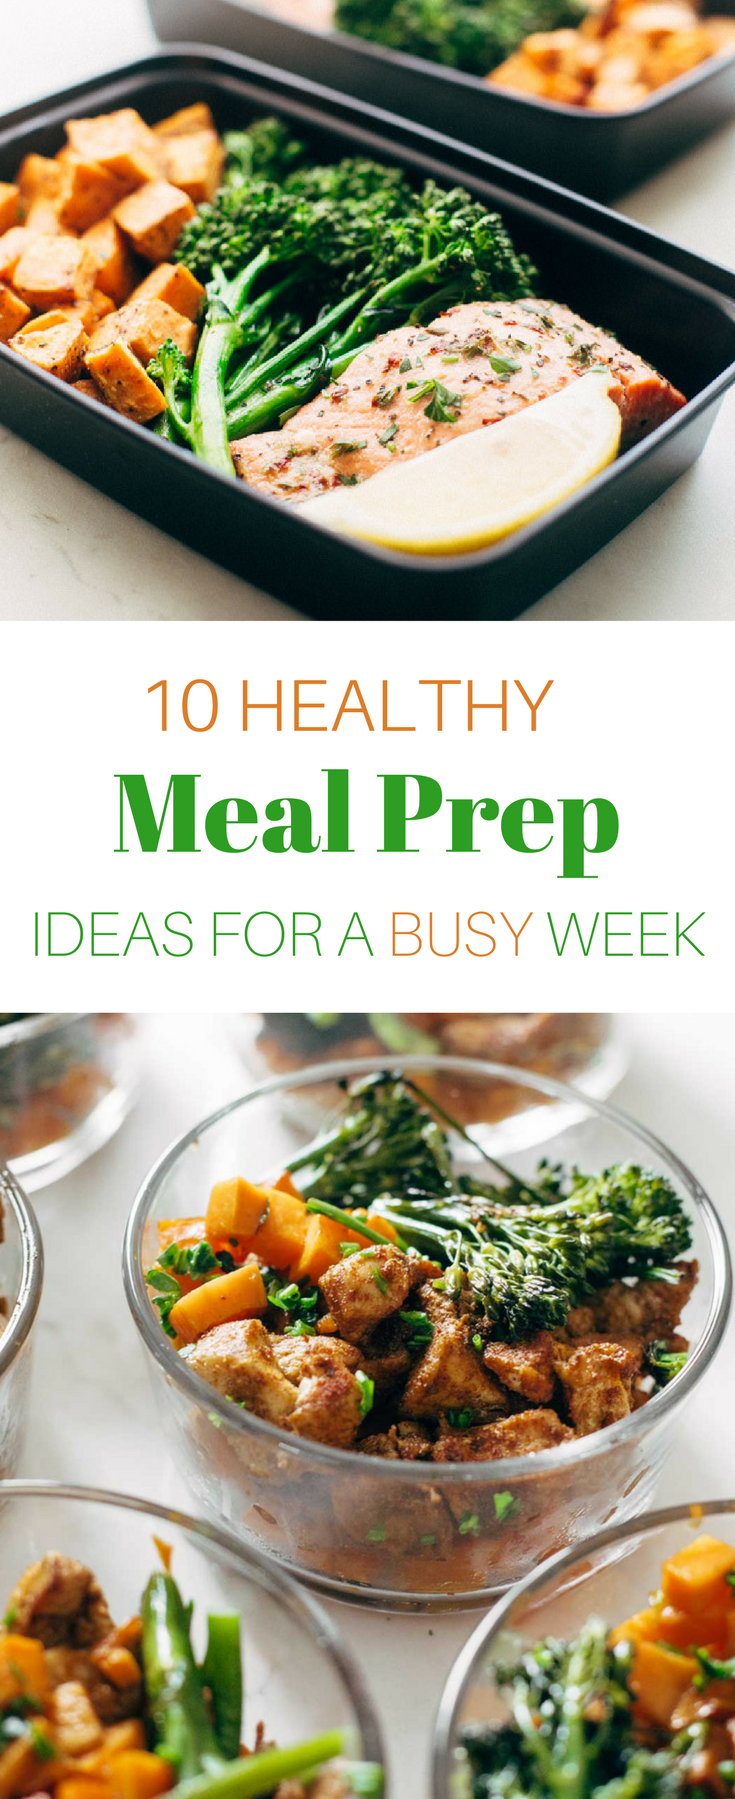 The easiest way to a healthy week? Plan ahead! These healthy meal prep ideas make weekday lunches a snap—and they’re delicious,